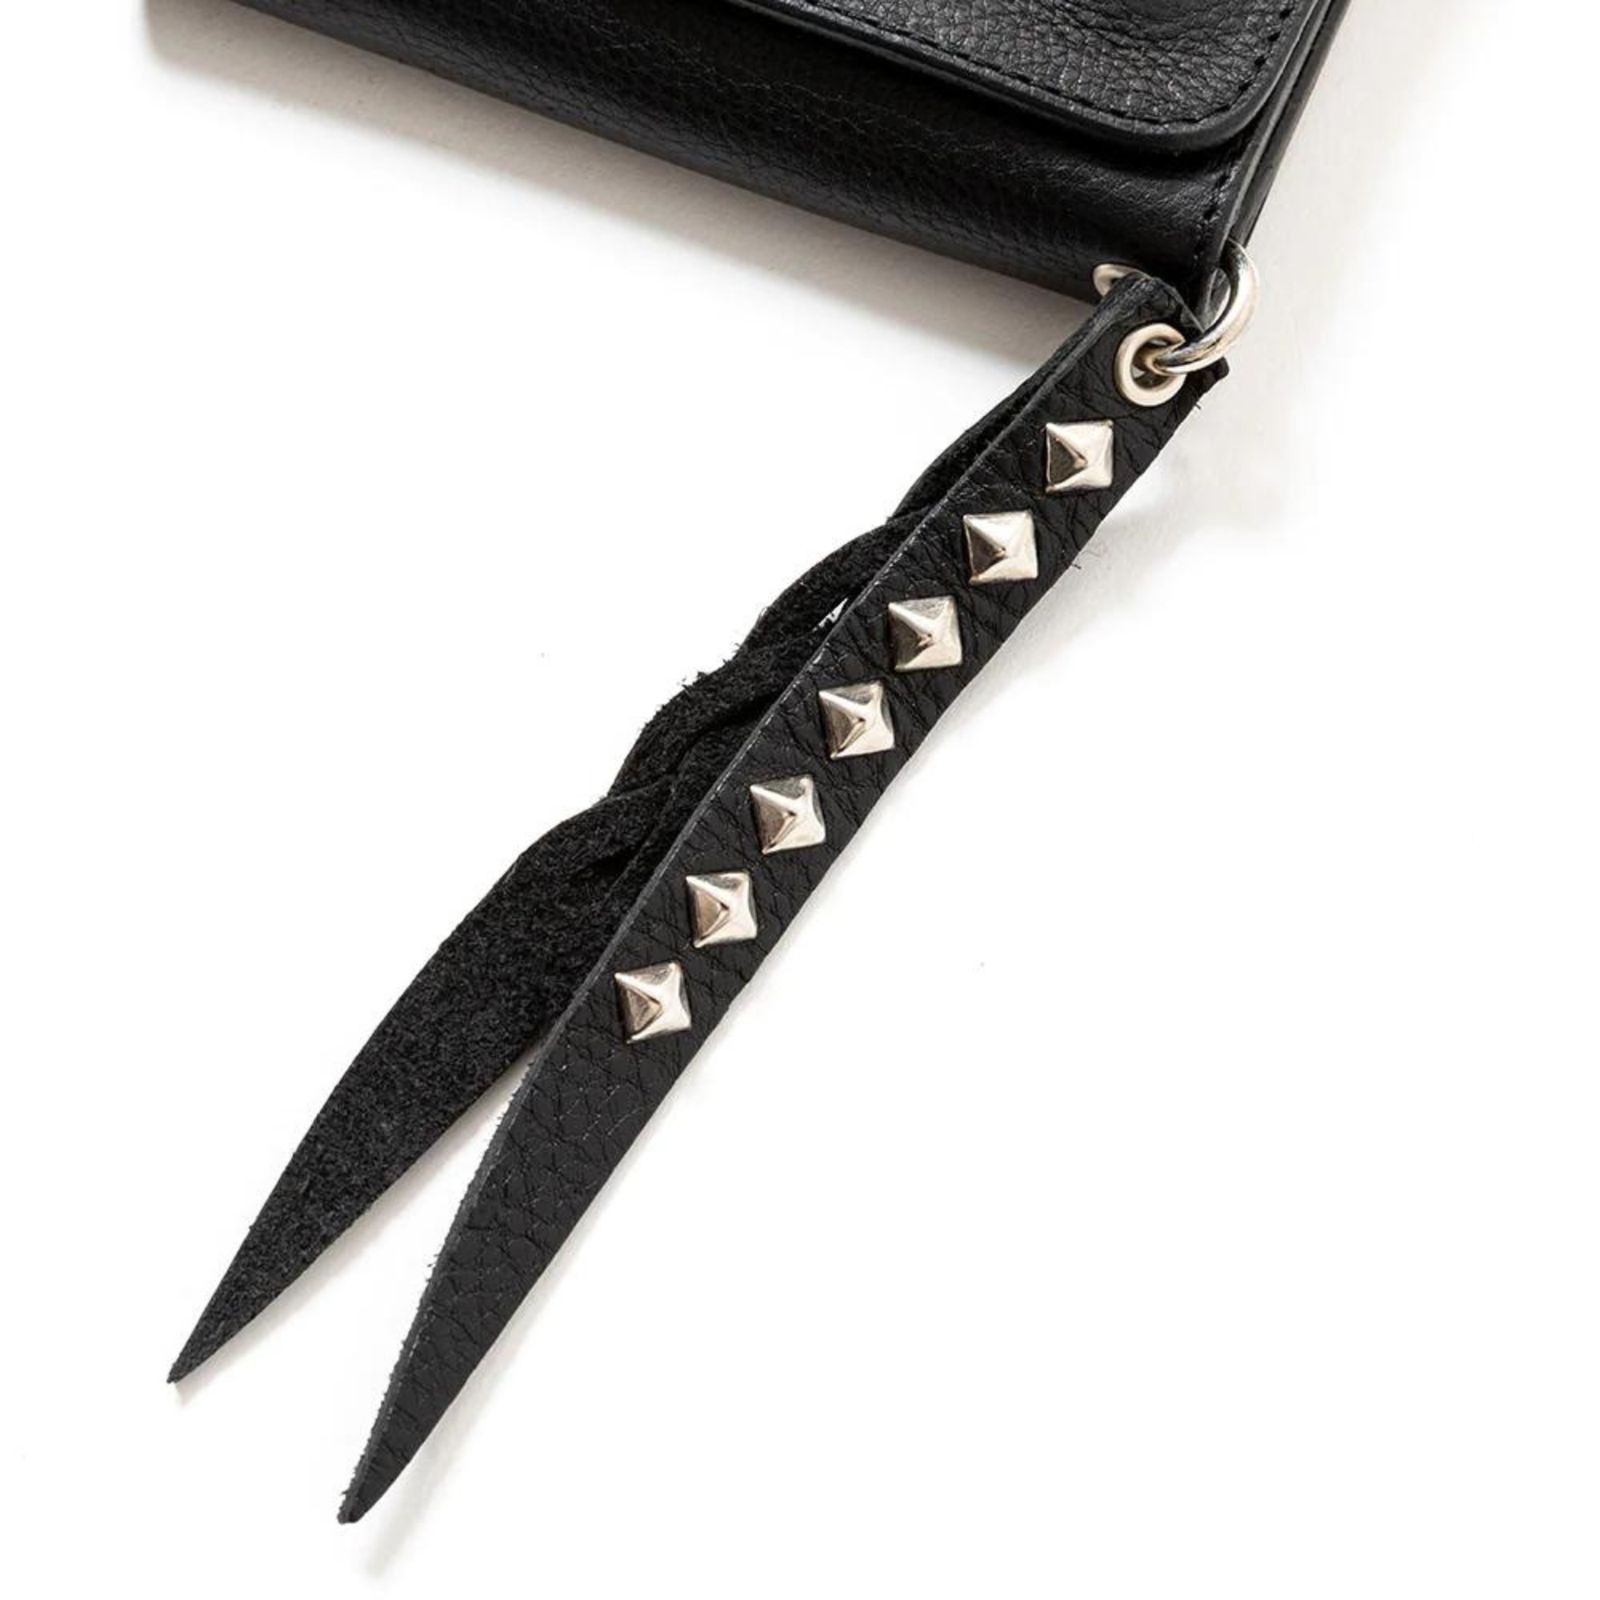 CALEE - PLANE LEATHER FLAP HALF WALLET ＜STUDS CHARM＞ (BLACK) / プレーンレザー フラップ ハーフウォレット ＜スタッズチャーム＞ | chord online store